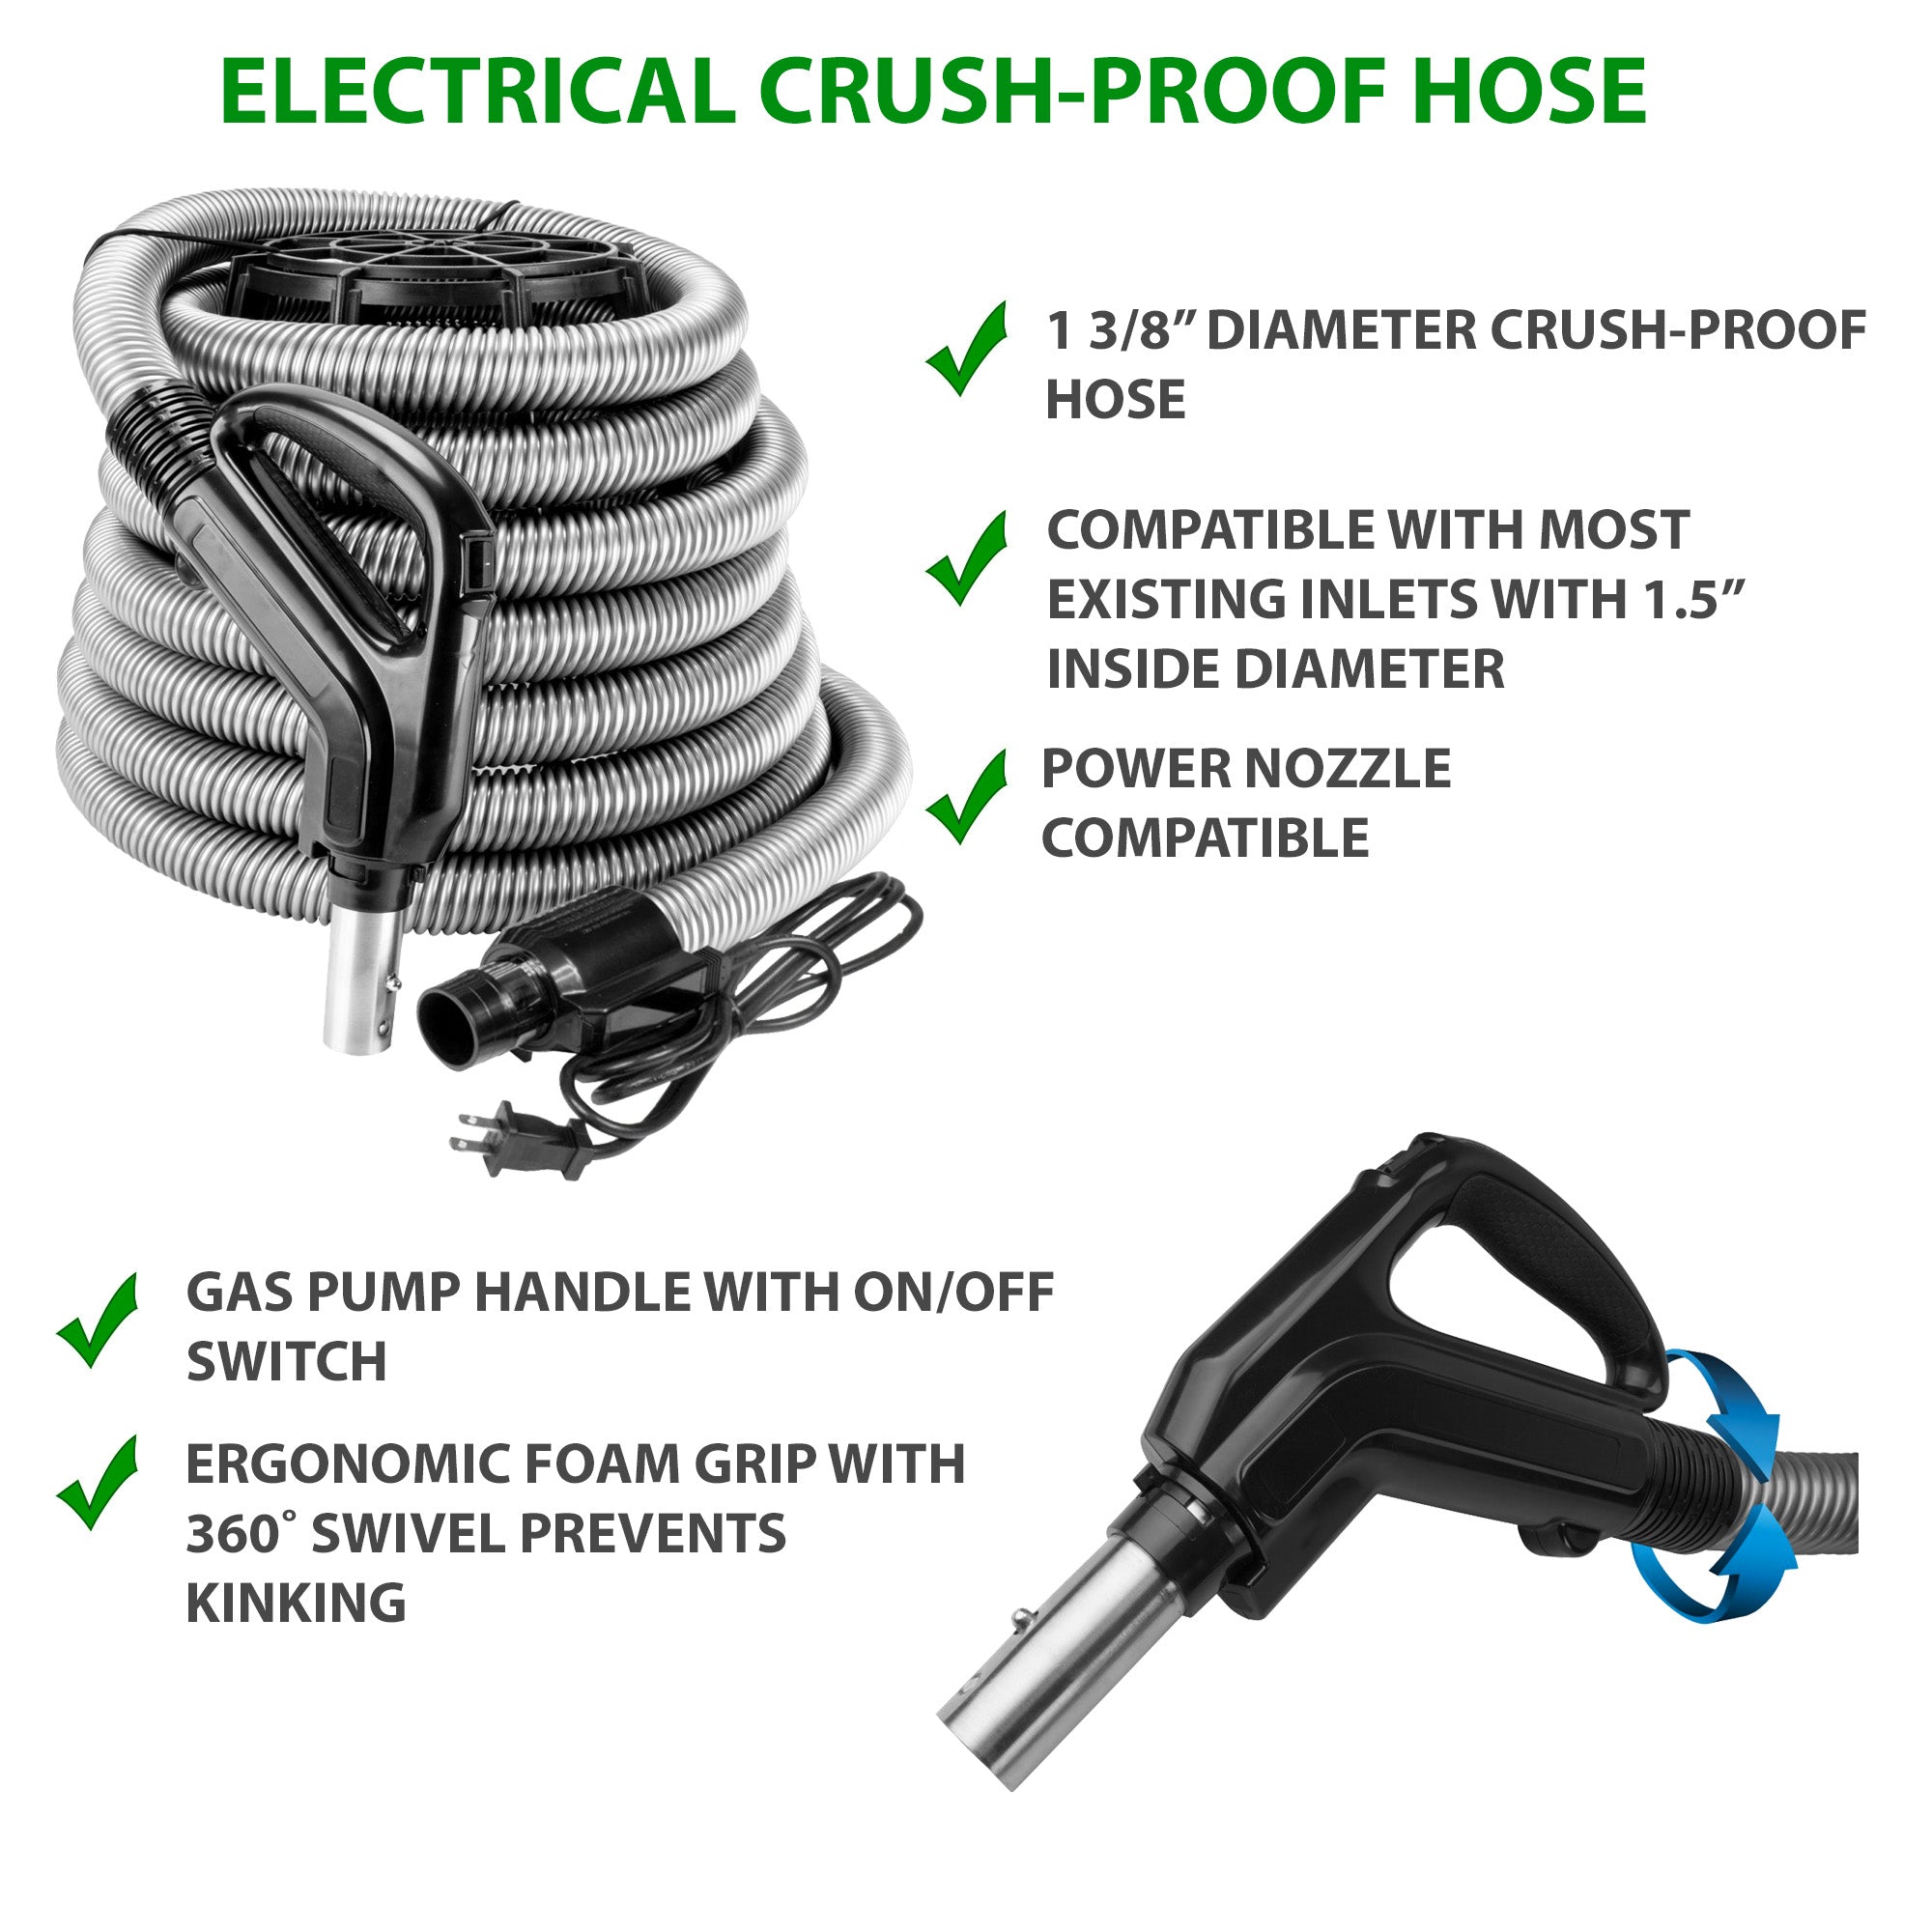 Electric Crush-Proof Hose with Gas Pump Handle